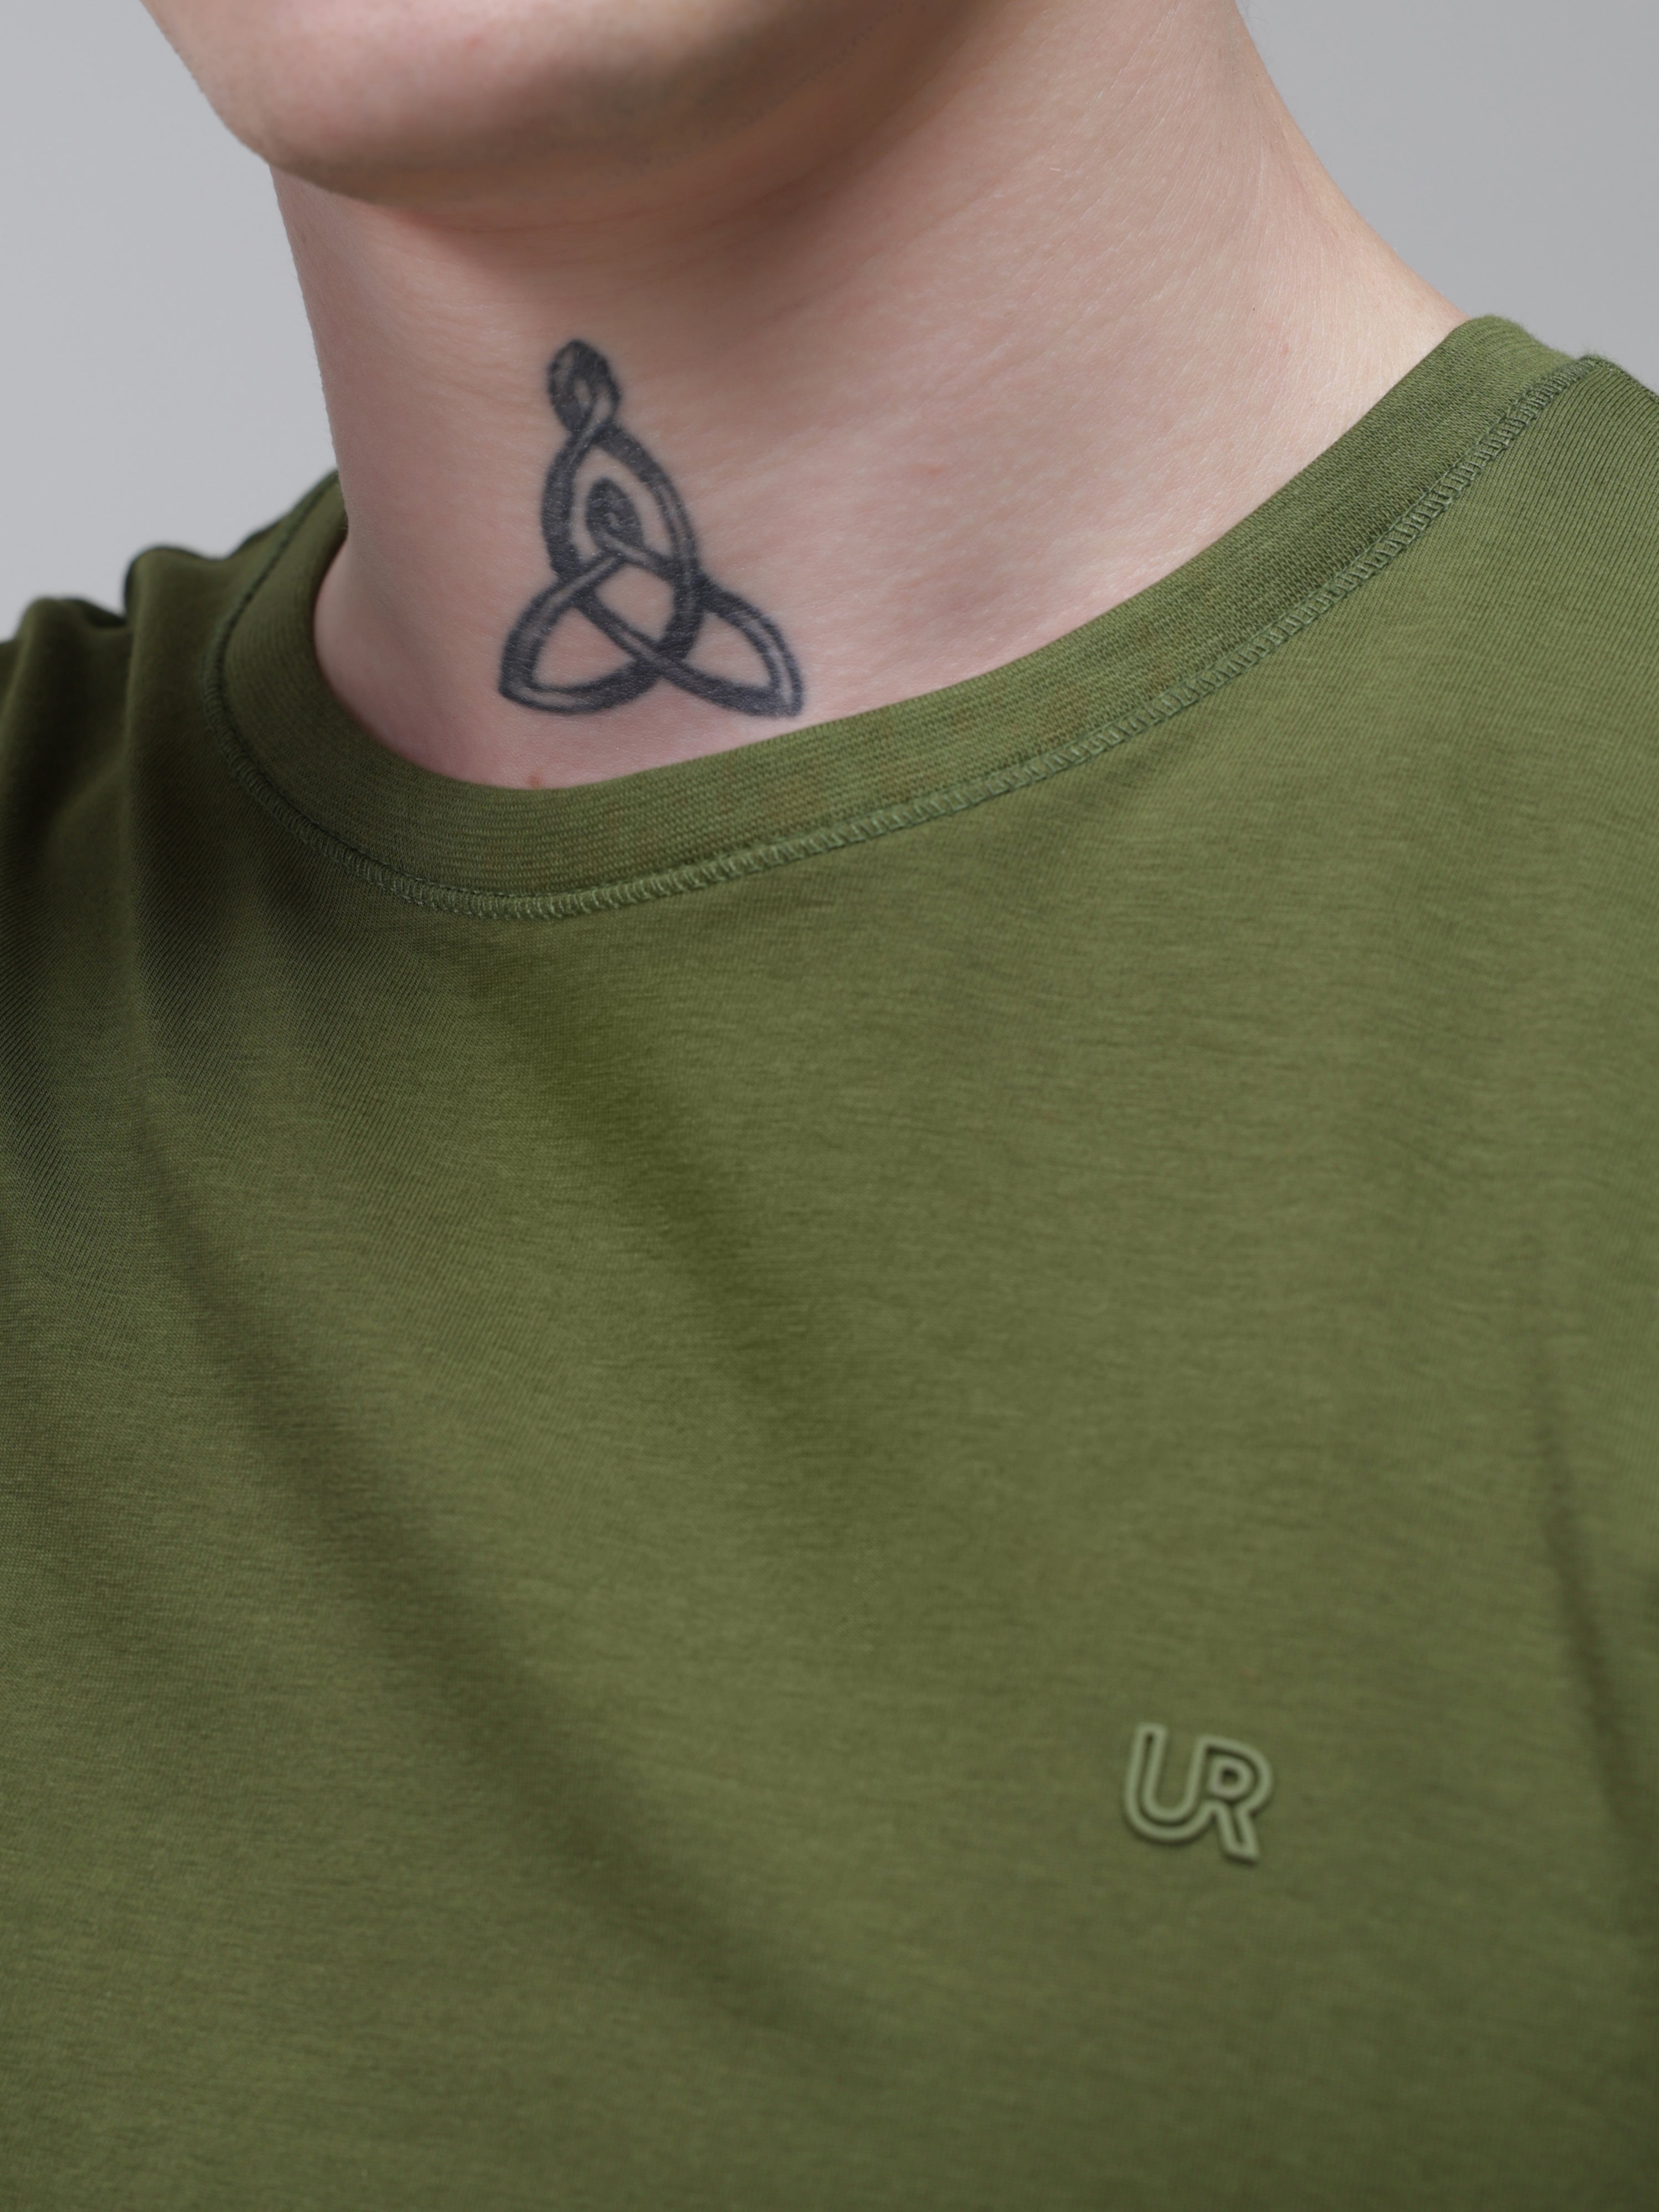 Man wearing green round-neck Turms T-shirt, featuring stain-proof and water-resistant properties, with visible tattoo on neck.